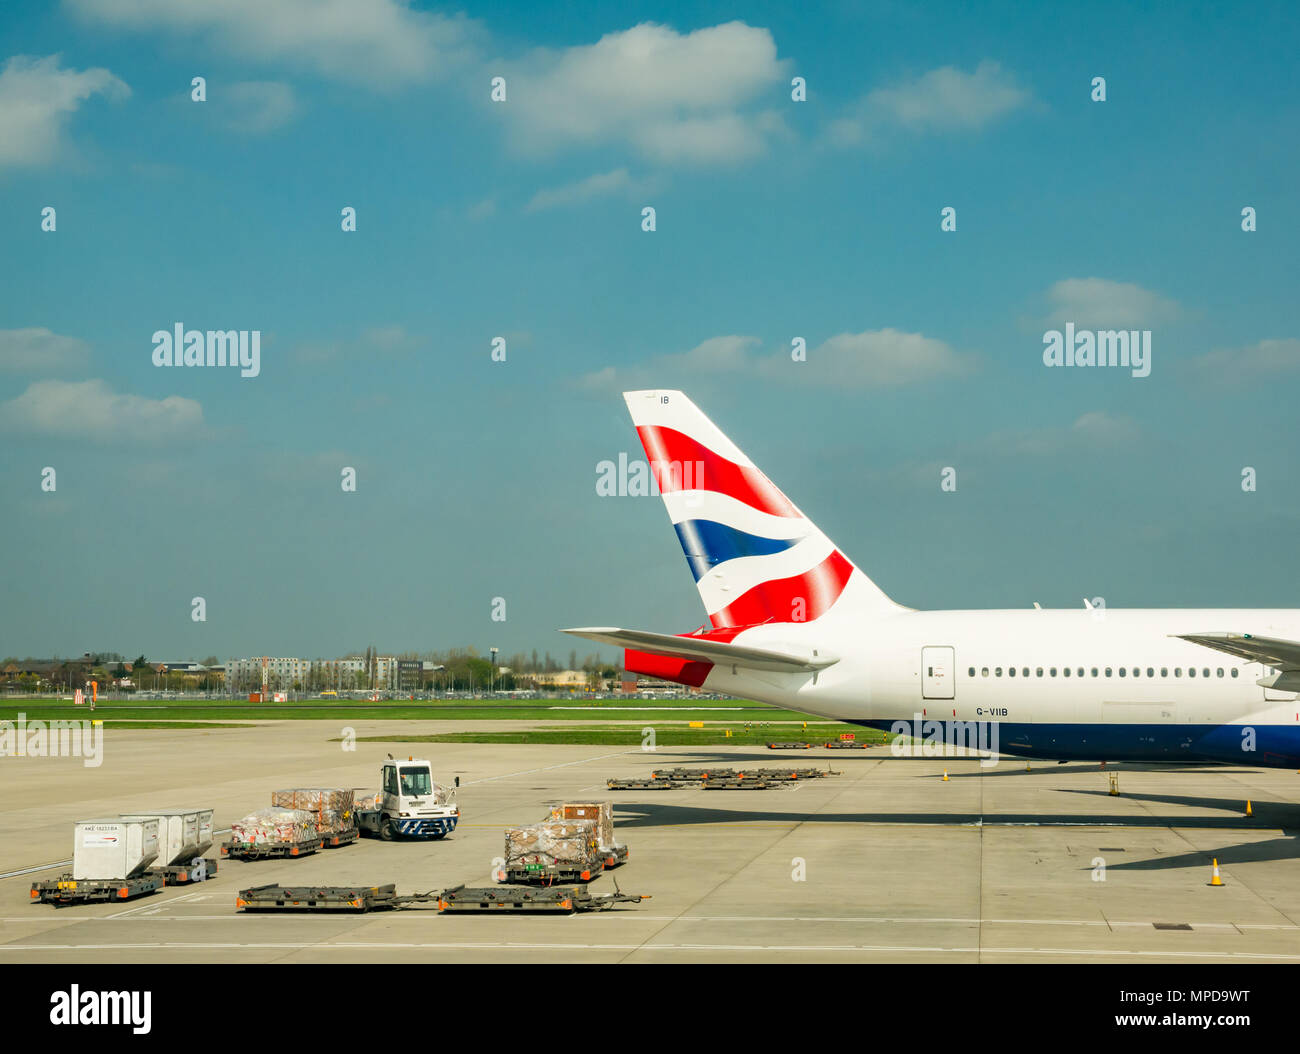 British Airways planes, including a Boeing 777 on airport apron with airport vehicles, Terminal 5, Heathrow airport, London, England, UK Stock Photo